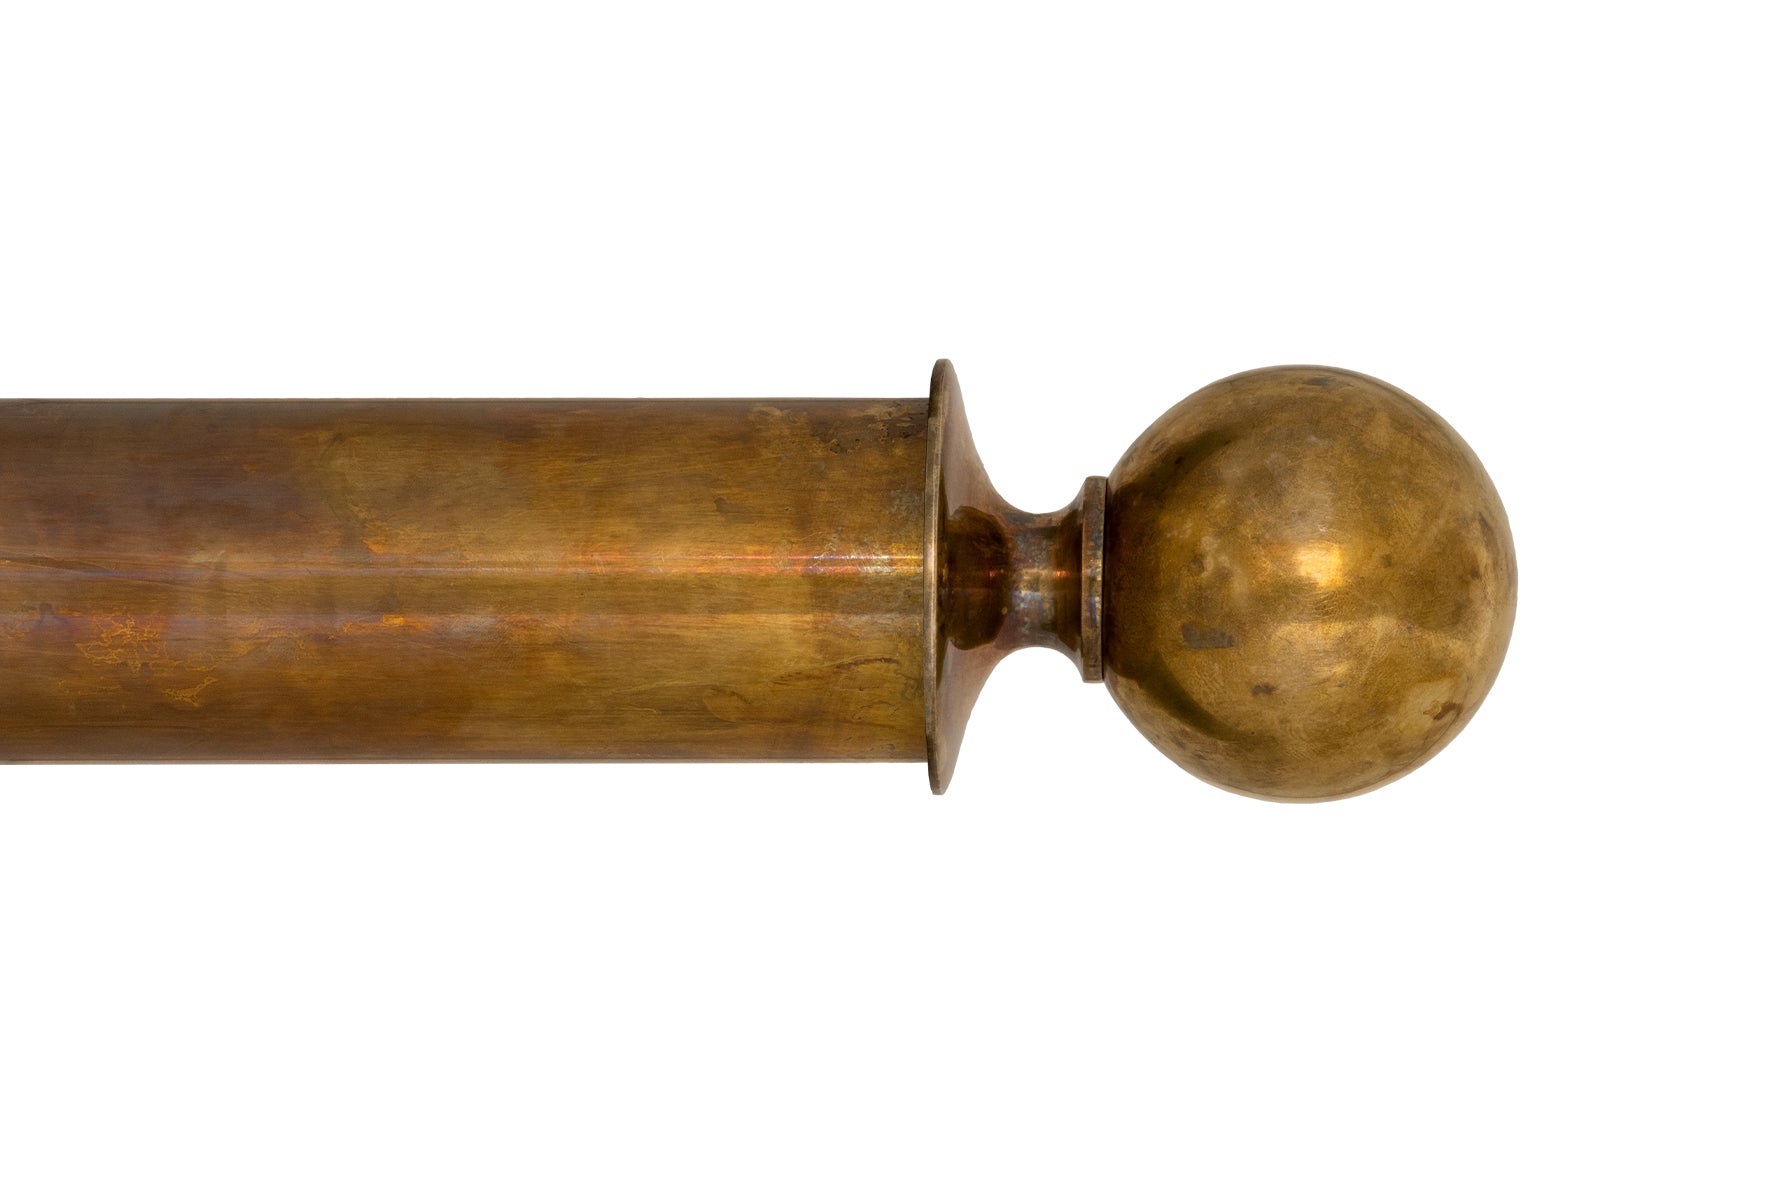 Tillys Classic Plain Ball Finial Curtain Pole Set in Old Brass